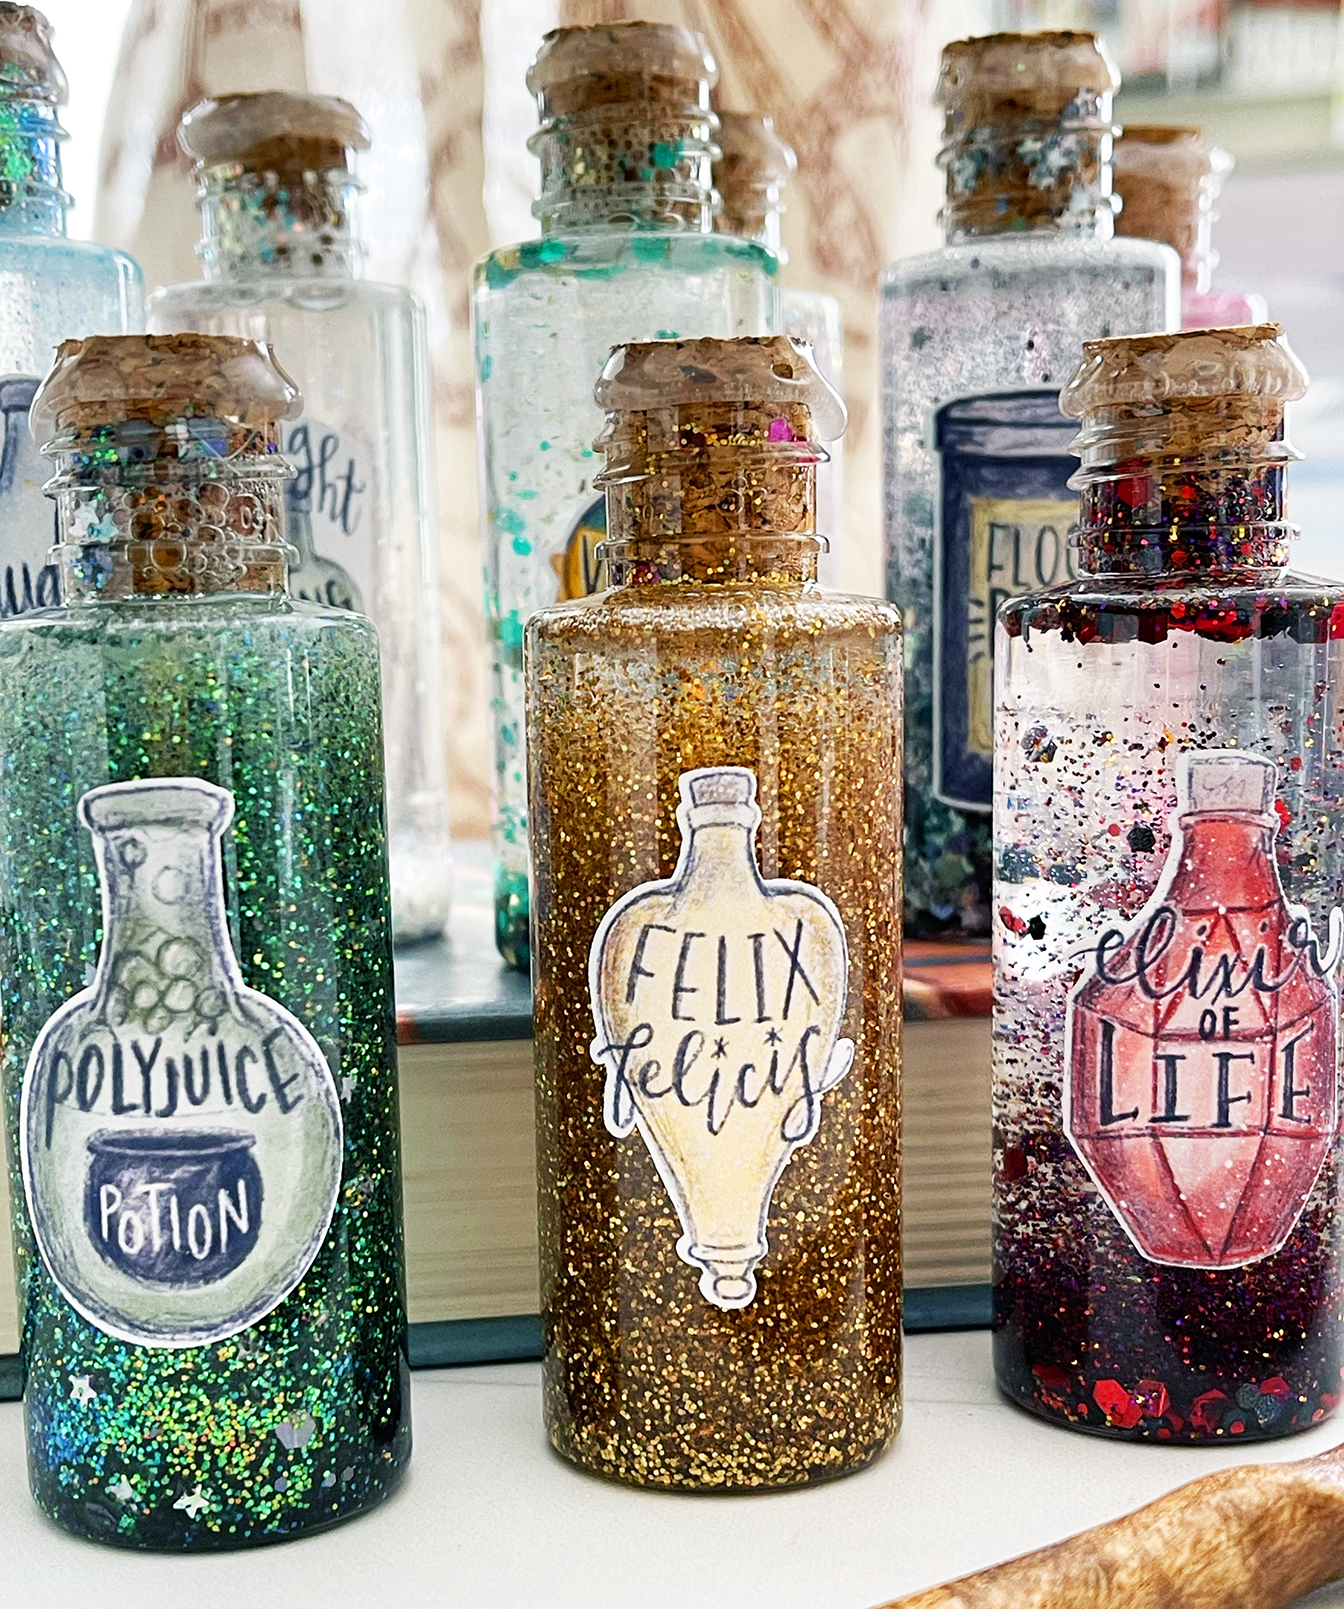 The Top 10 Harry Potter Potions & How to Make Them  Harry potter potion  labels, Harry potter potions, Harry potter love potion